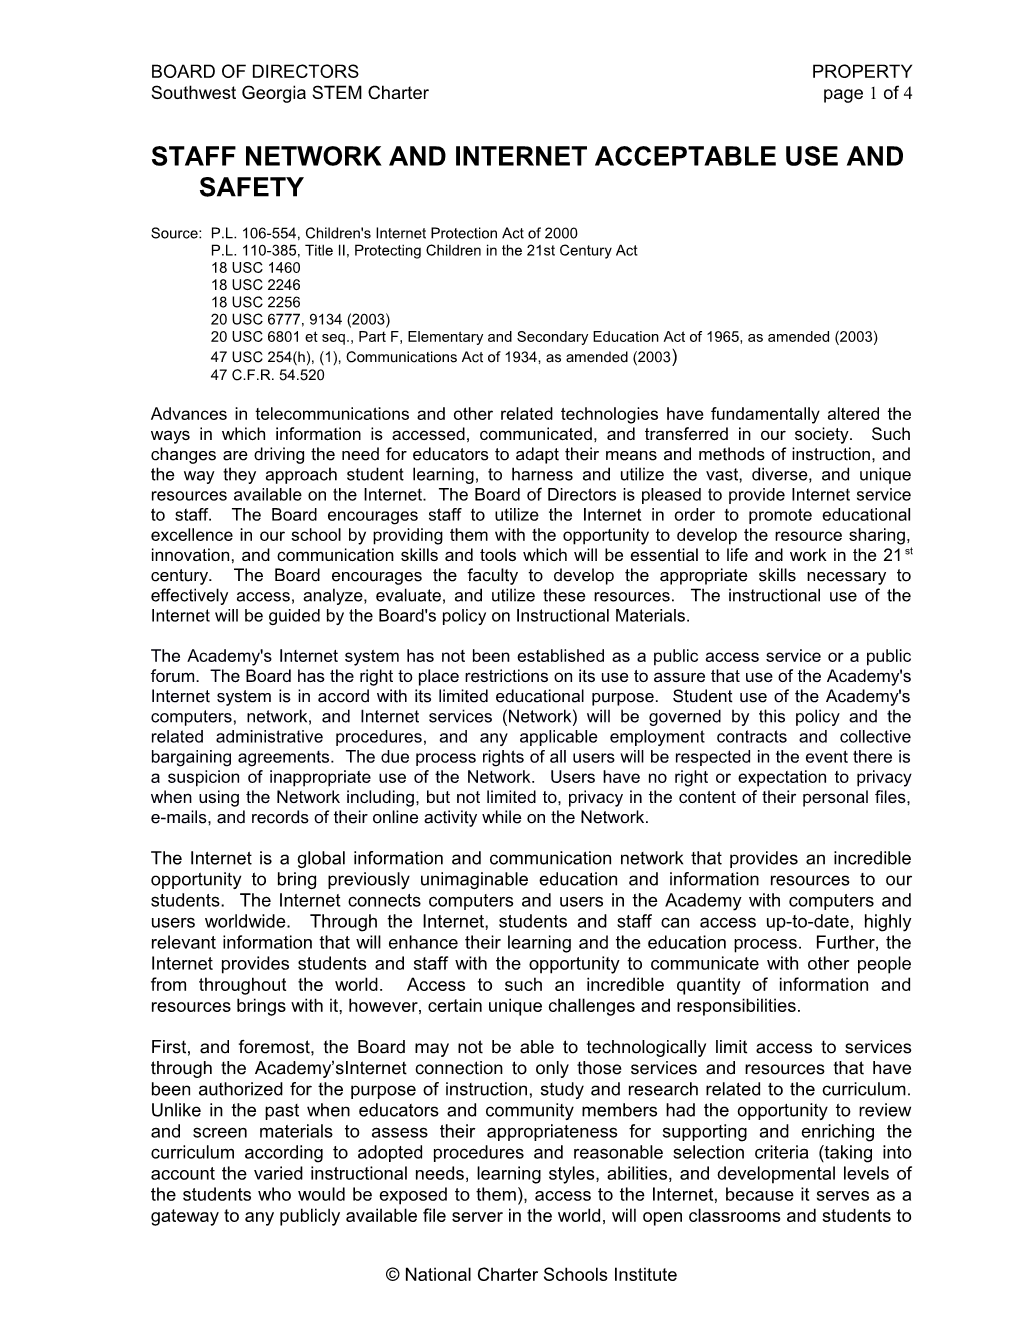 Staff Network and Internet Acceptable Use and Safety